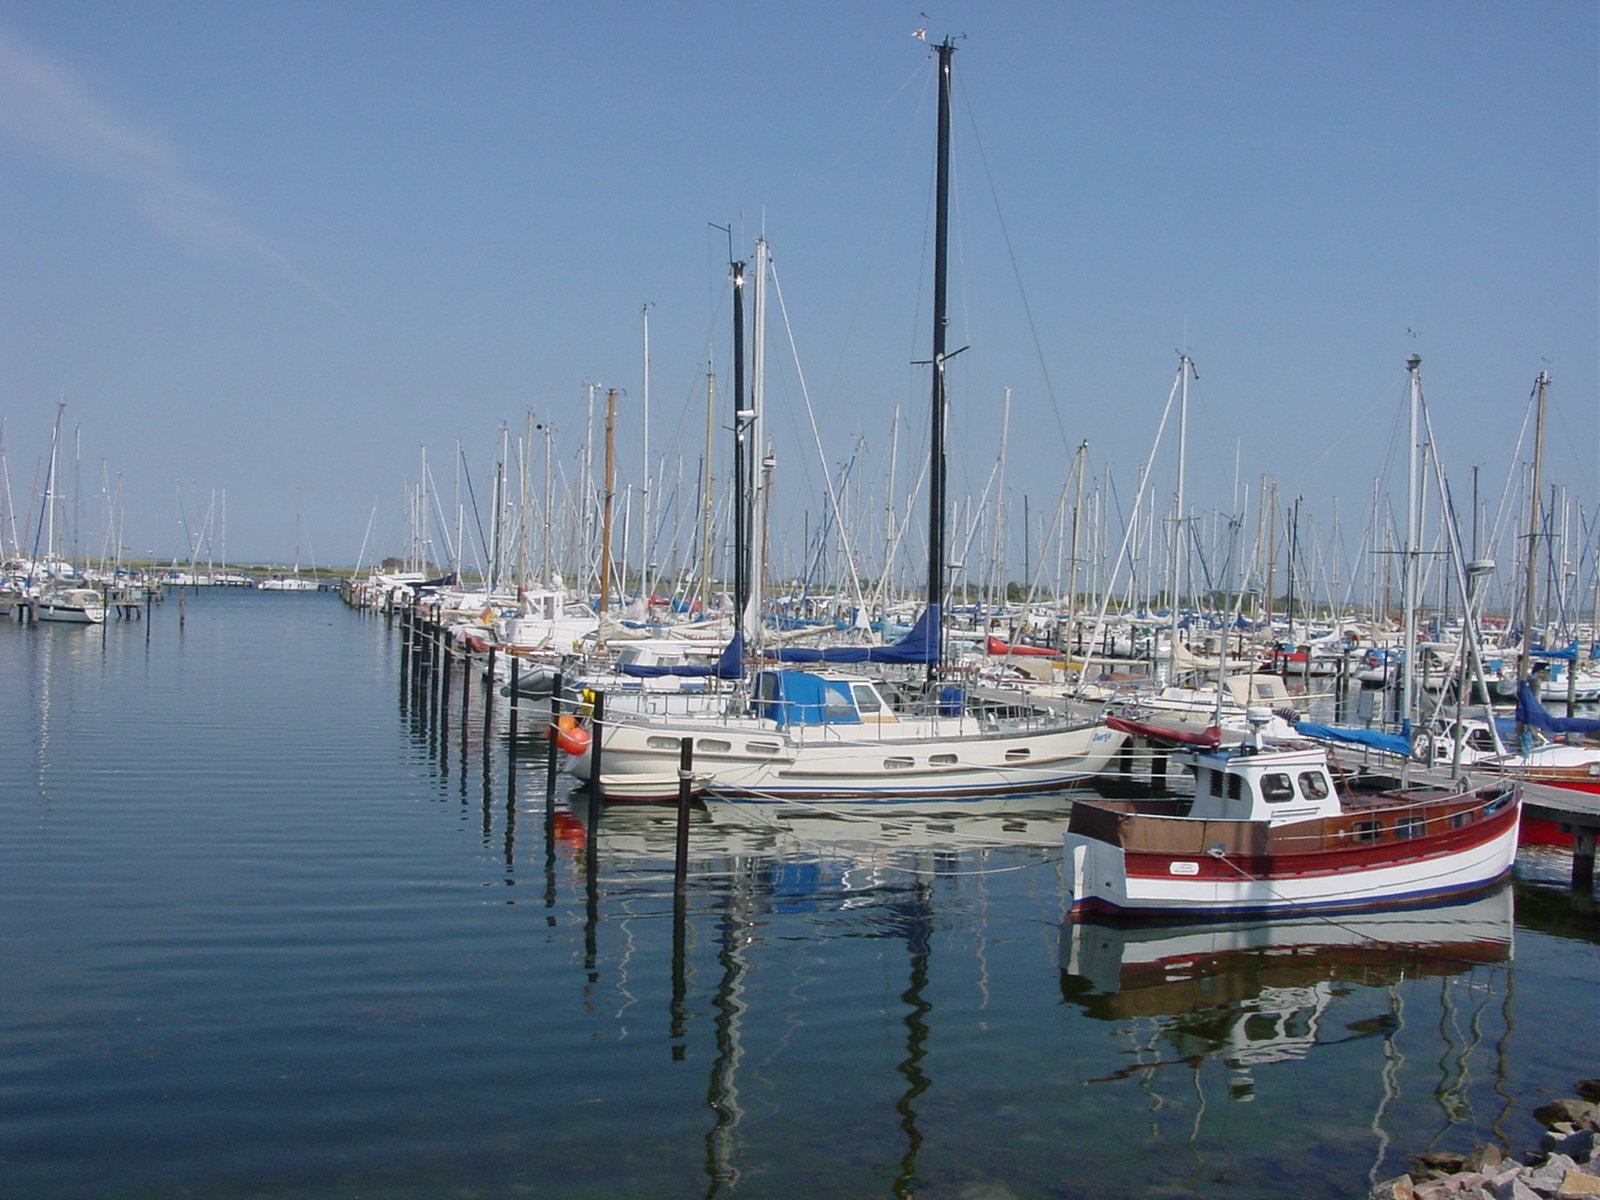 the boats are lined up in the water by the dock